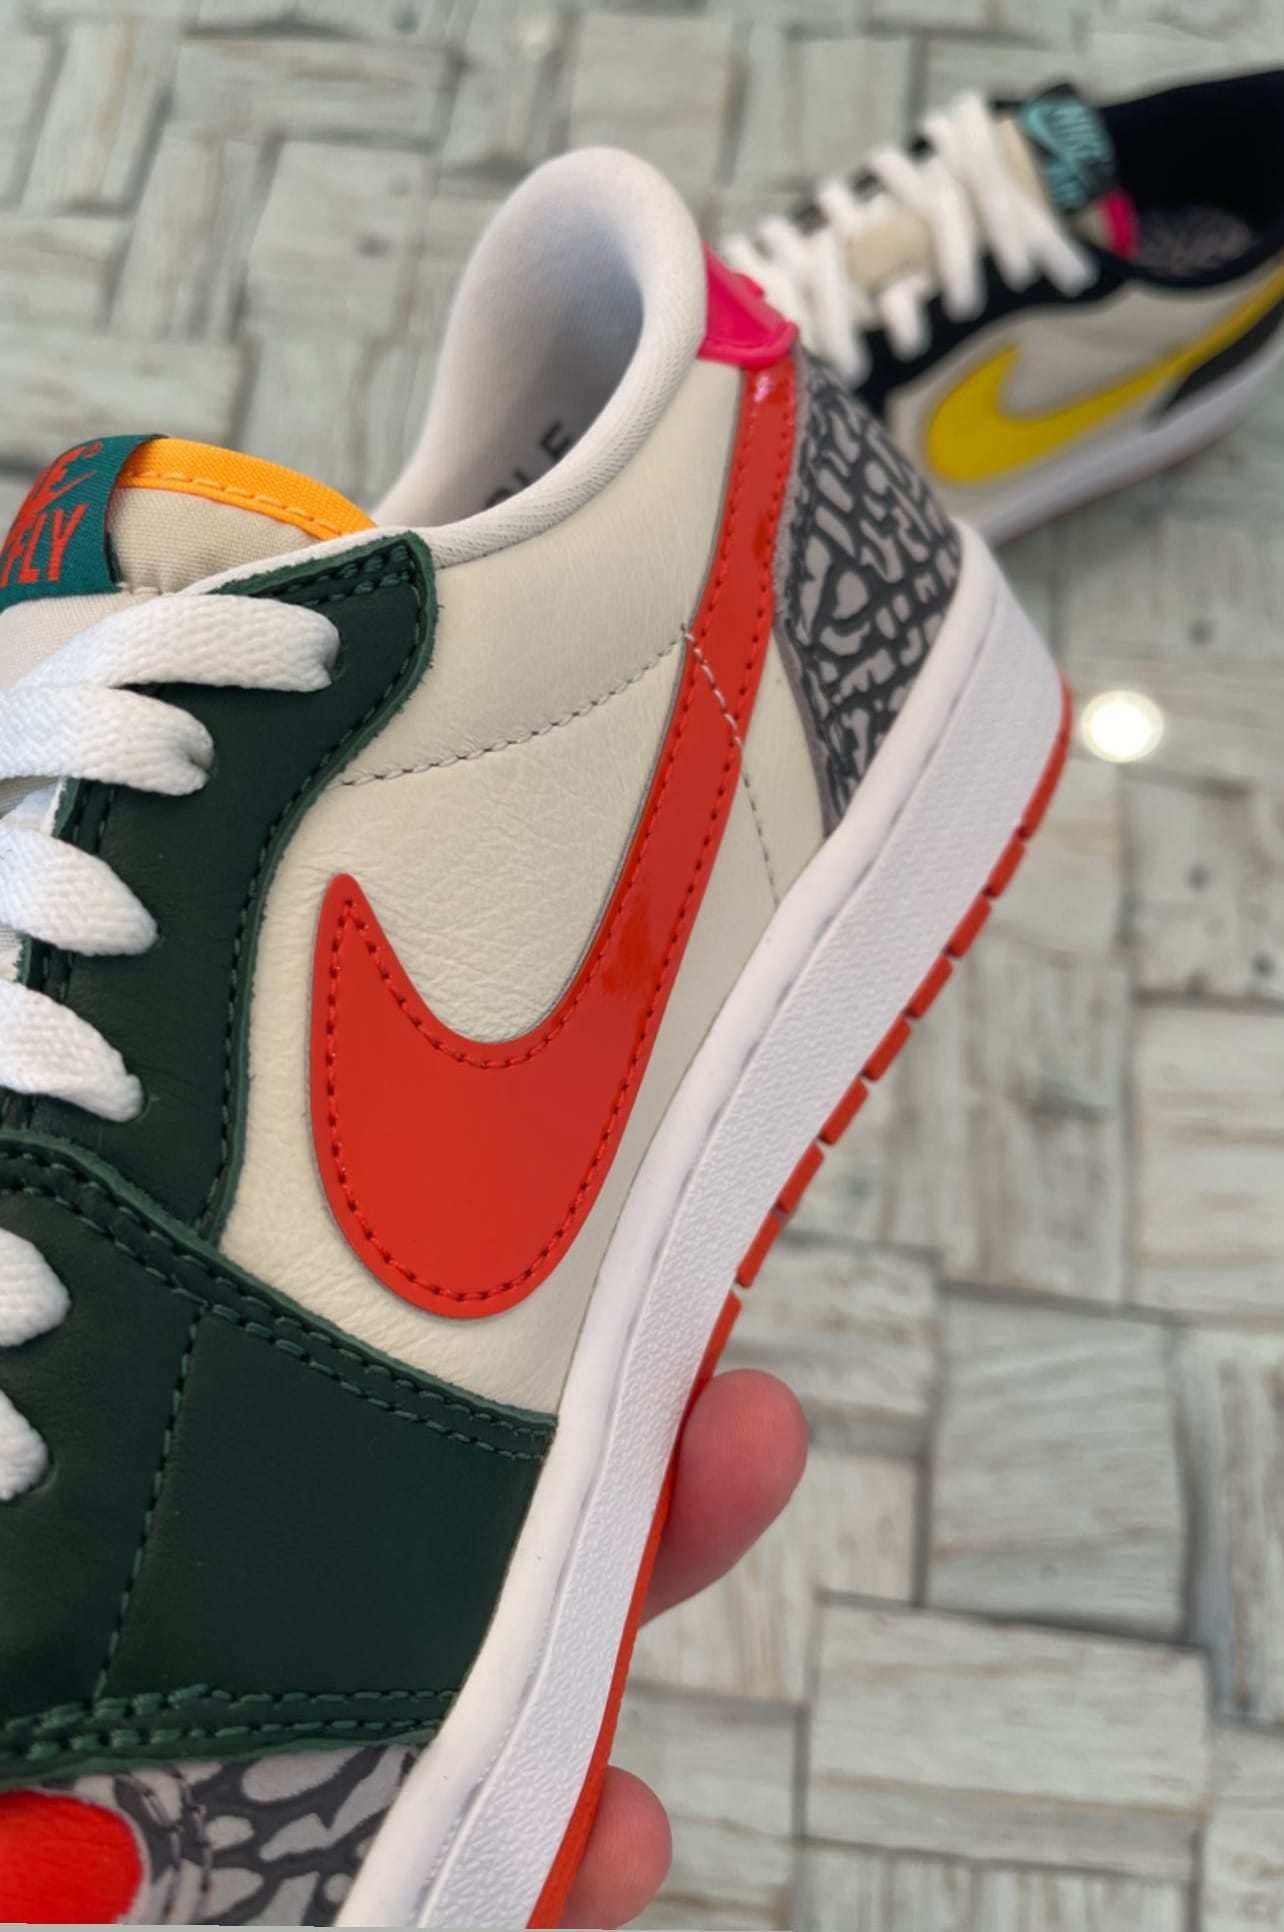 SoleFly x Air Jordan 1 Low &#x27;What The&#x27; Sample